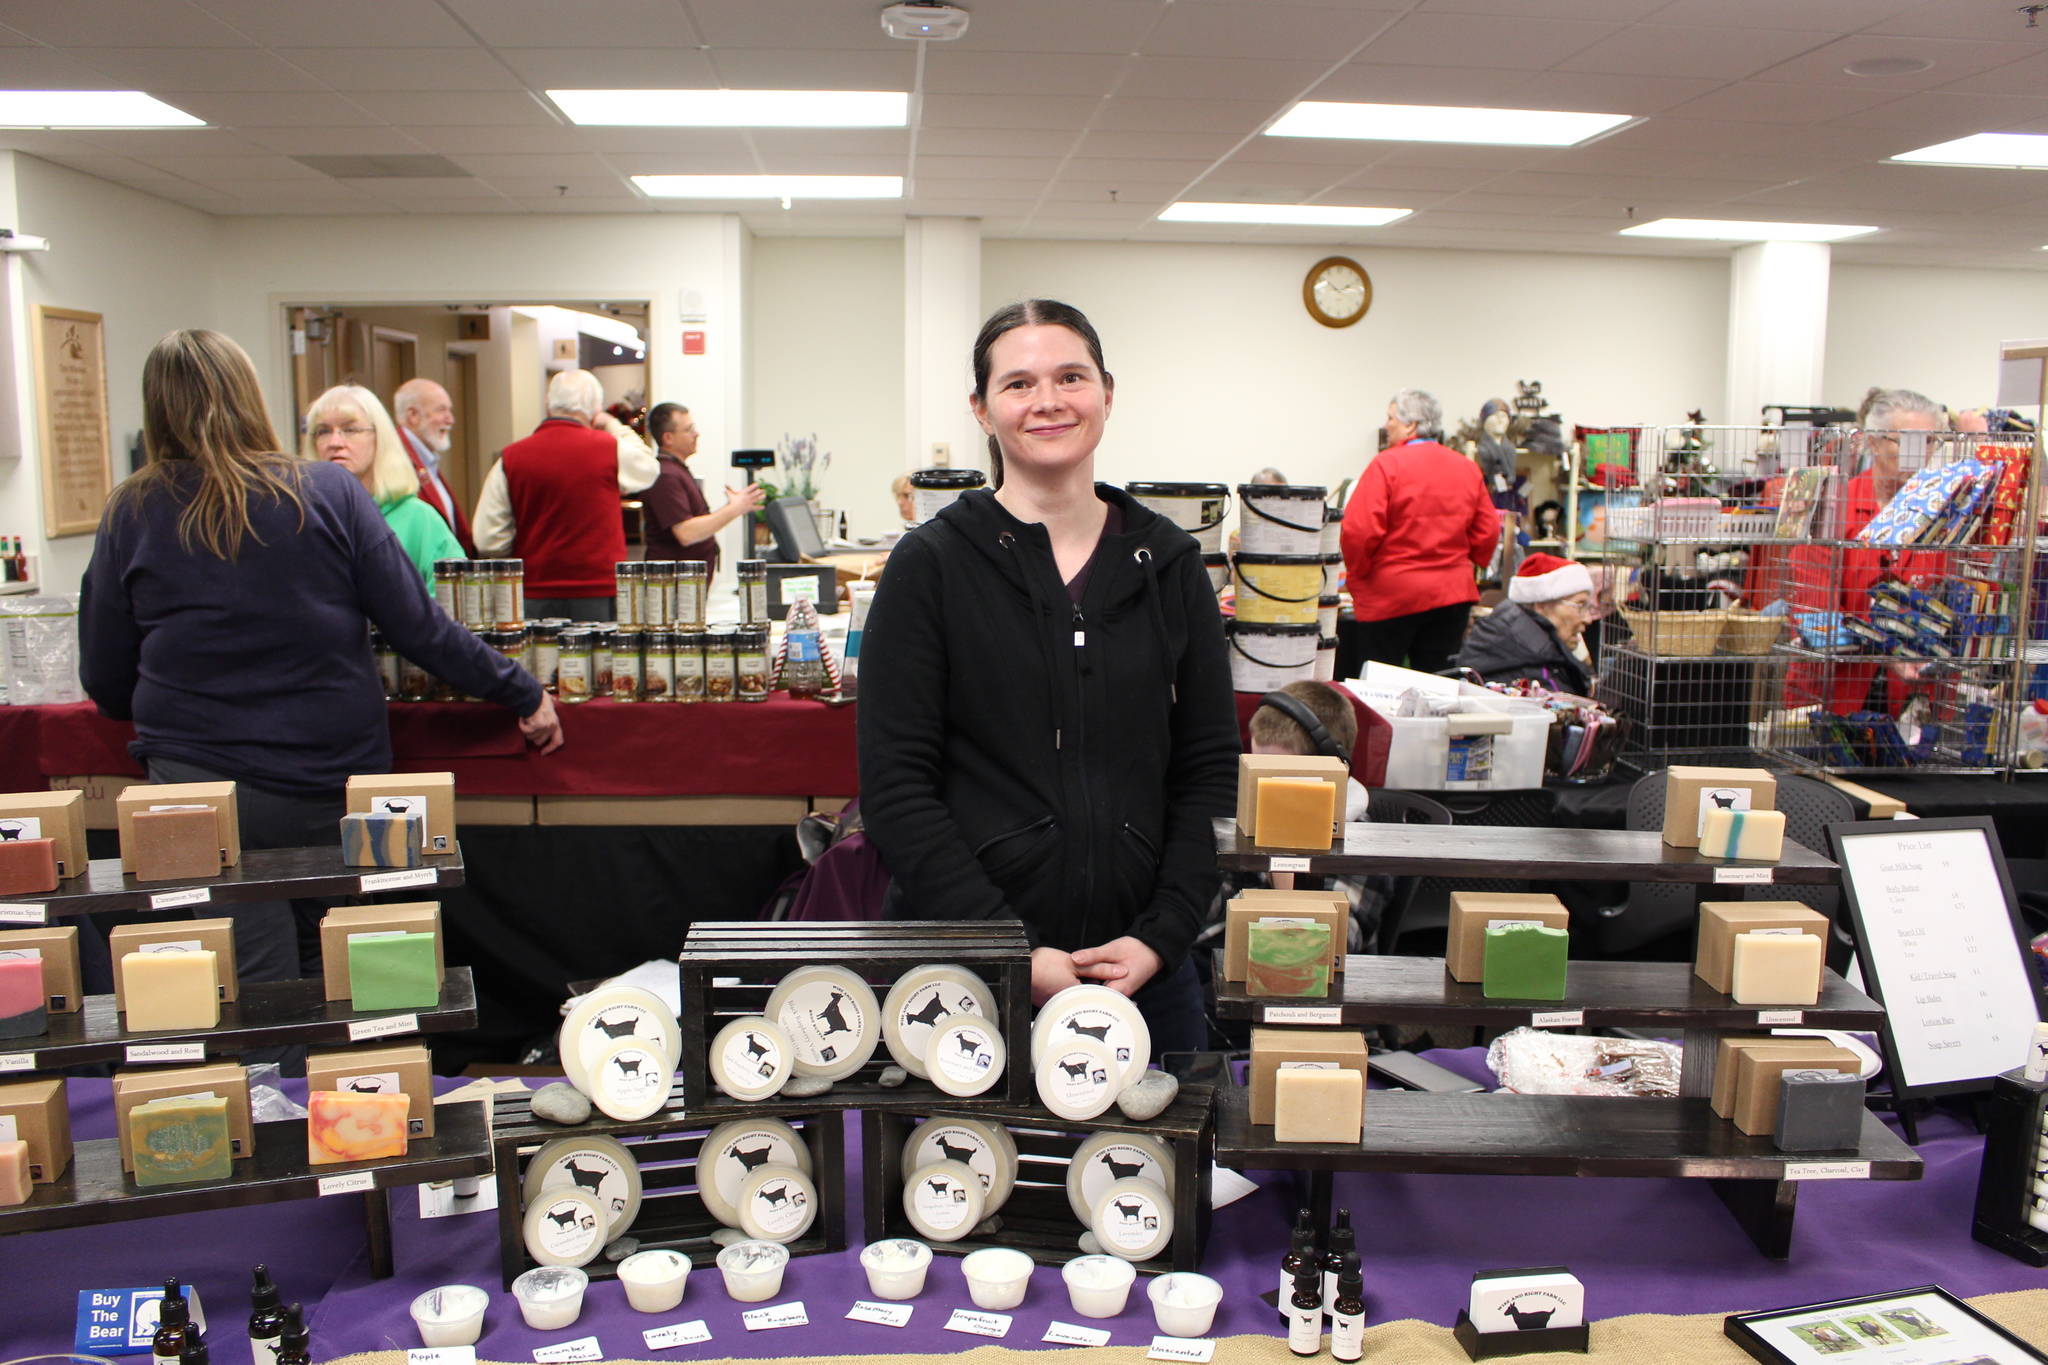 Meg Wright, owner of Wise and Right Farm, displays some of her goat milk soap for sale at the annual Central Peninsula Hospital Auxiliary Holiday Bazaar in Soldotna, Alaska on Dec. 6, 2019. (Photo by Brian Mazurek/Peninsula Clarion)